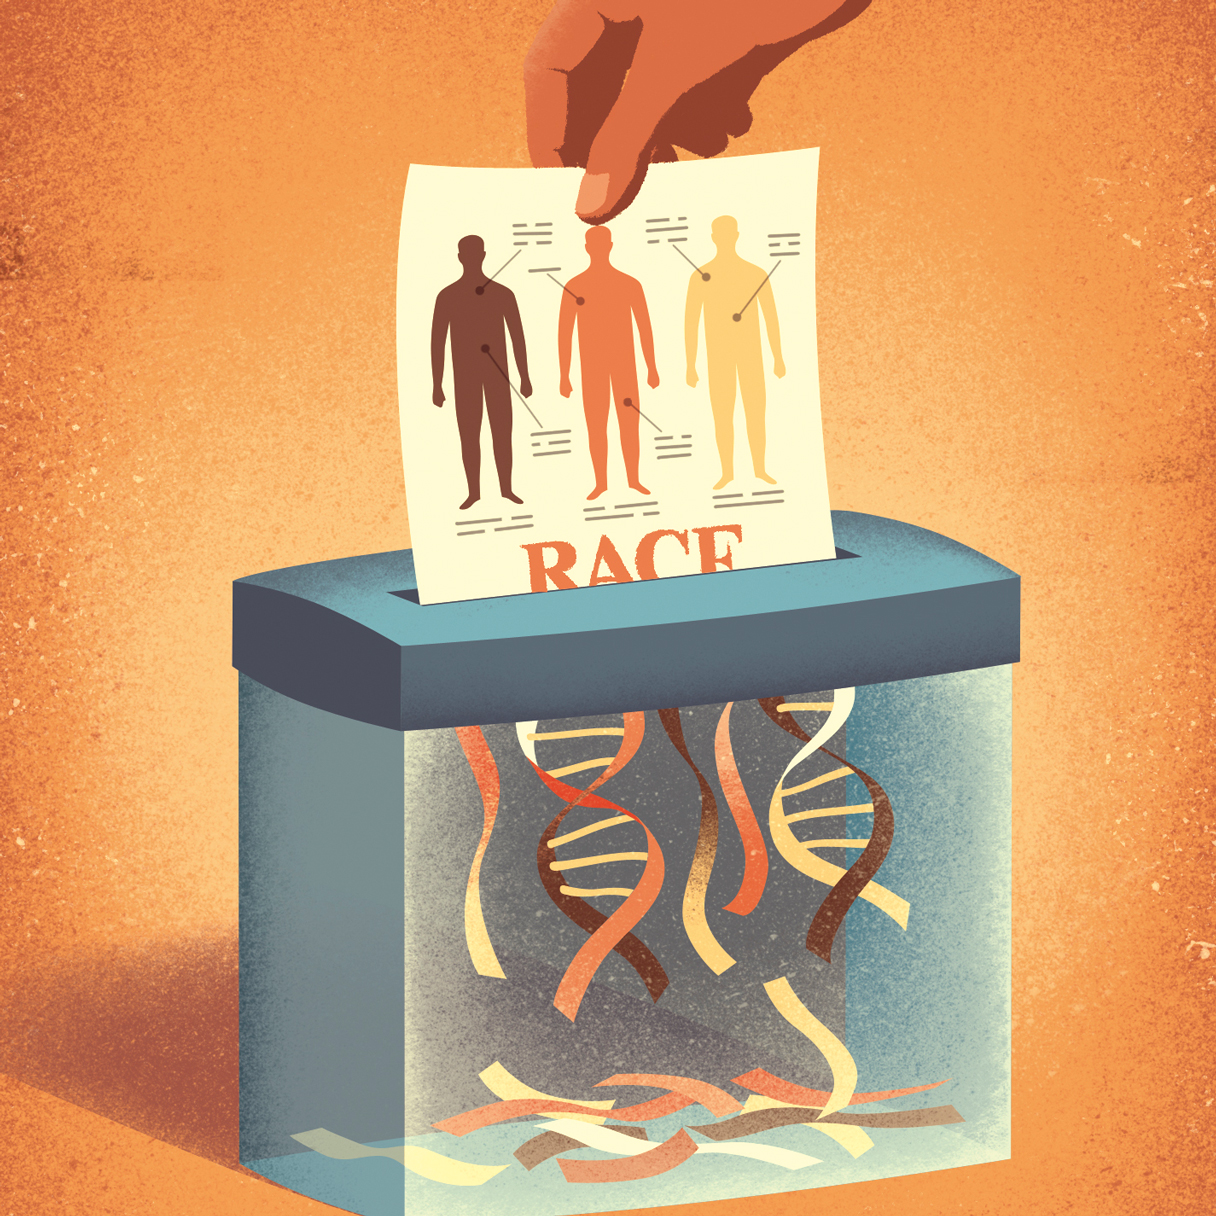 Stylized illustration showing a sheet of paper labeled 'RACE' with diagrams of three human figures of different tones with illegible labels. The paper is being fed into a shredder, and the shreds that are emerging form abstracted DNA double helices.